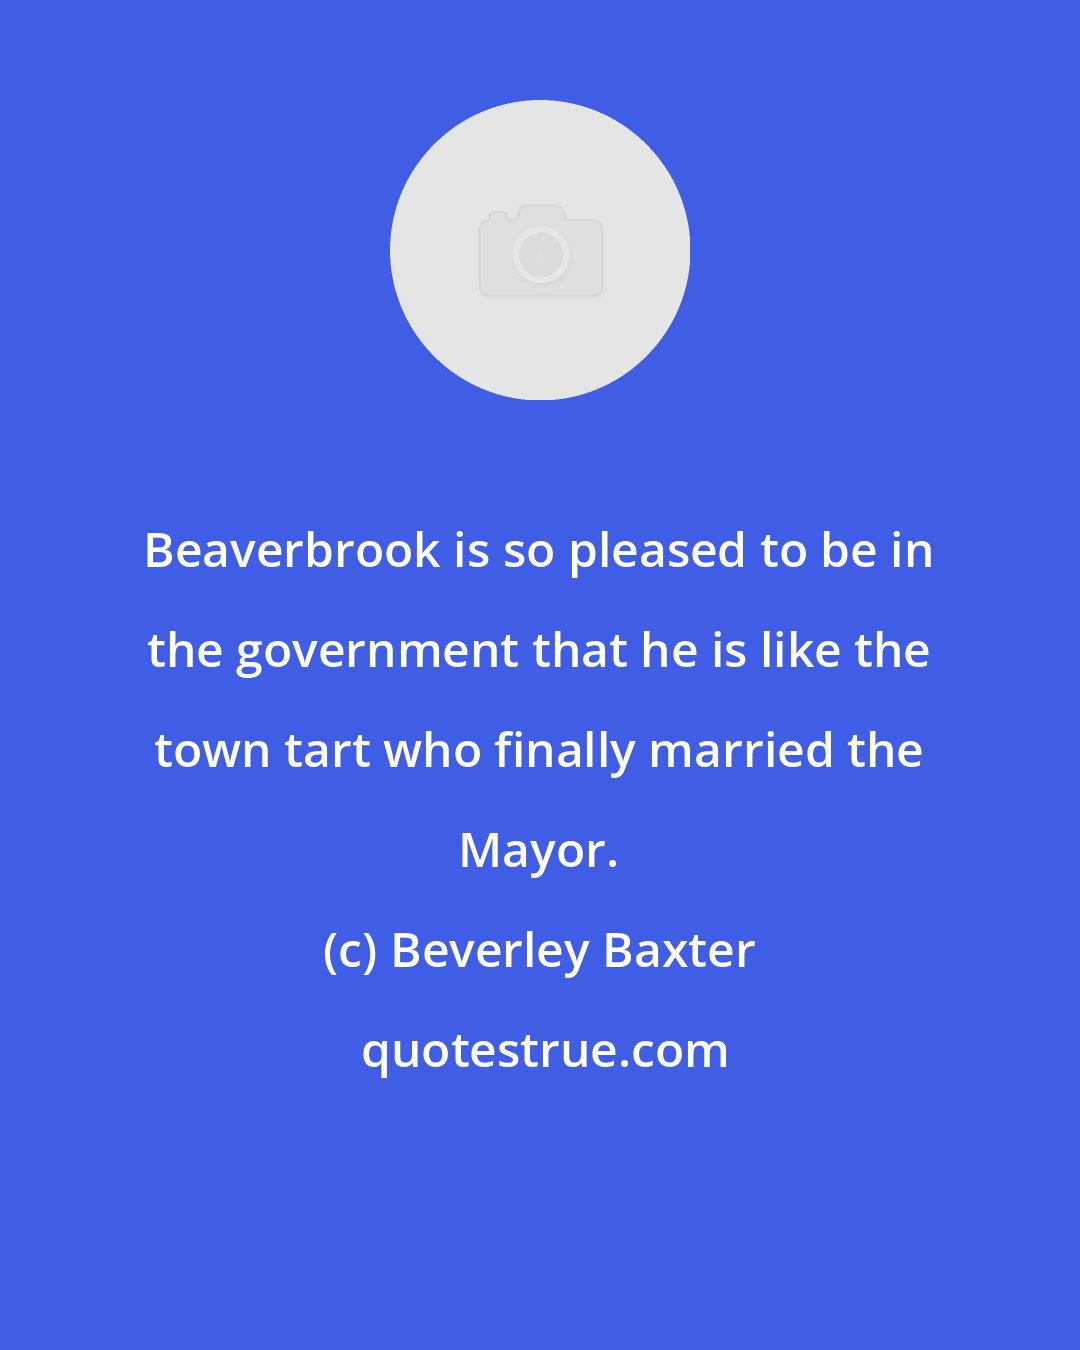 Beverley Baxter: Beaverbrook is so pleased to be in the government that he is like the town tart who finally married the Mayor.